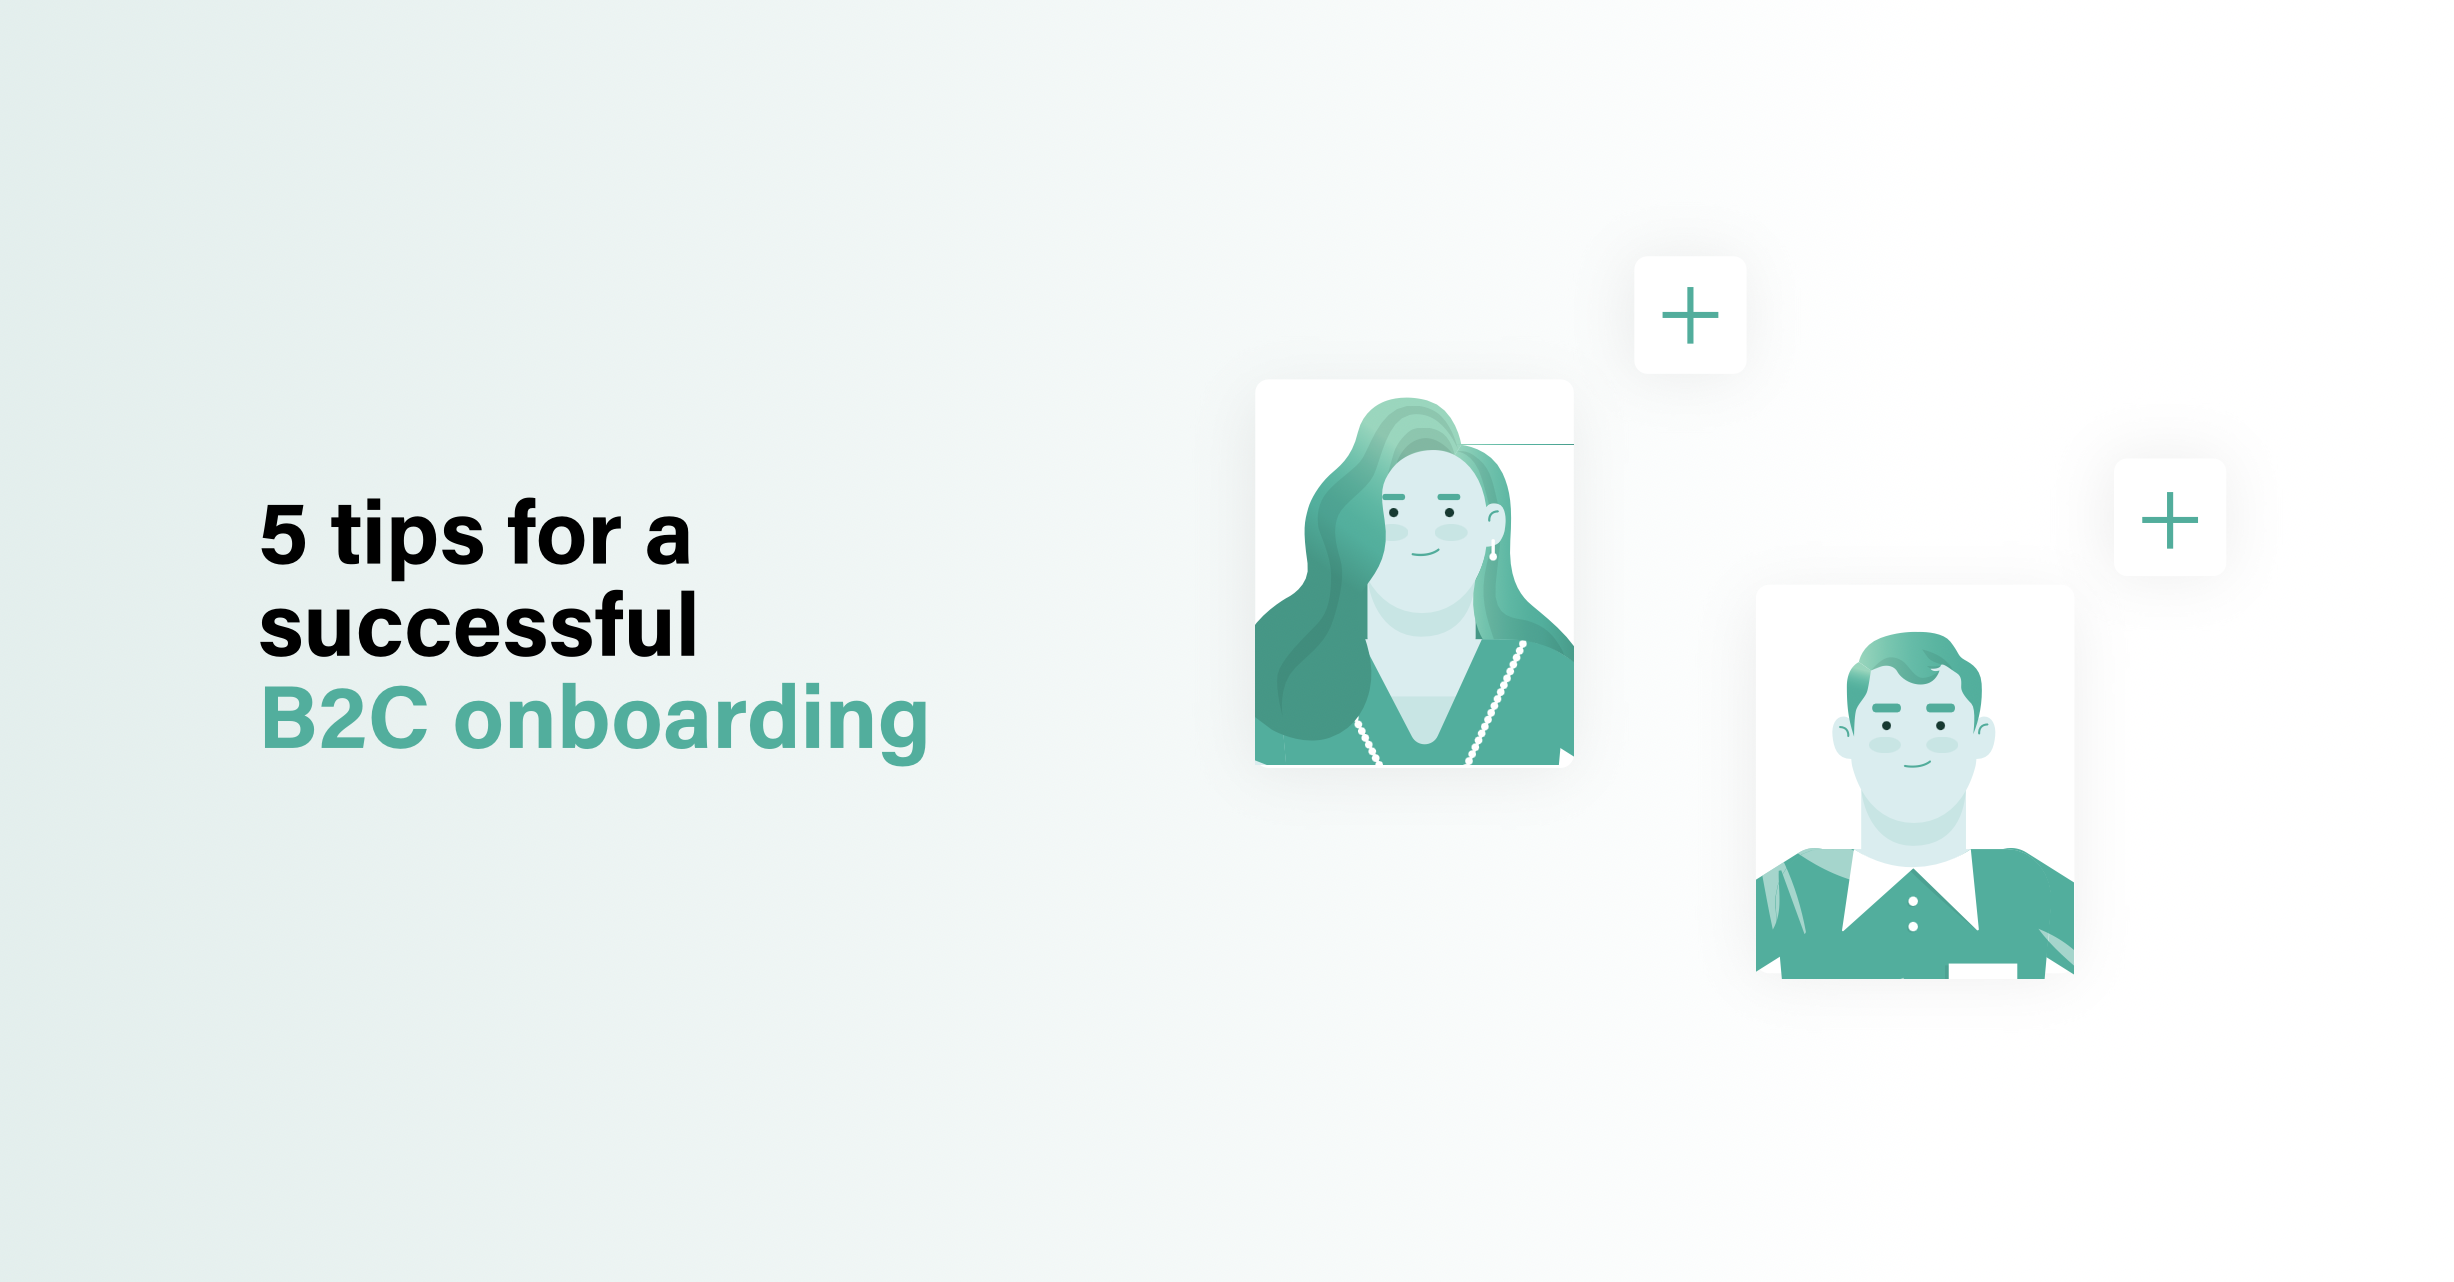 5 tips for a successful B2C onboarding